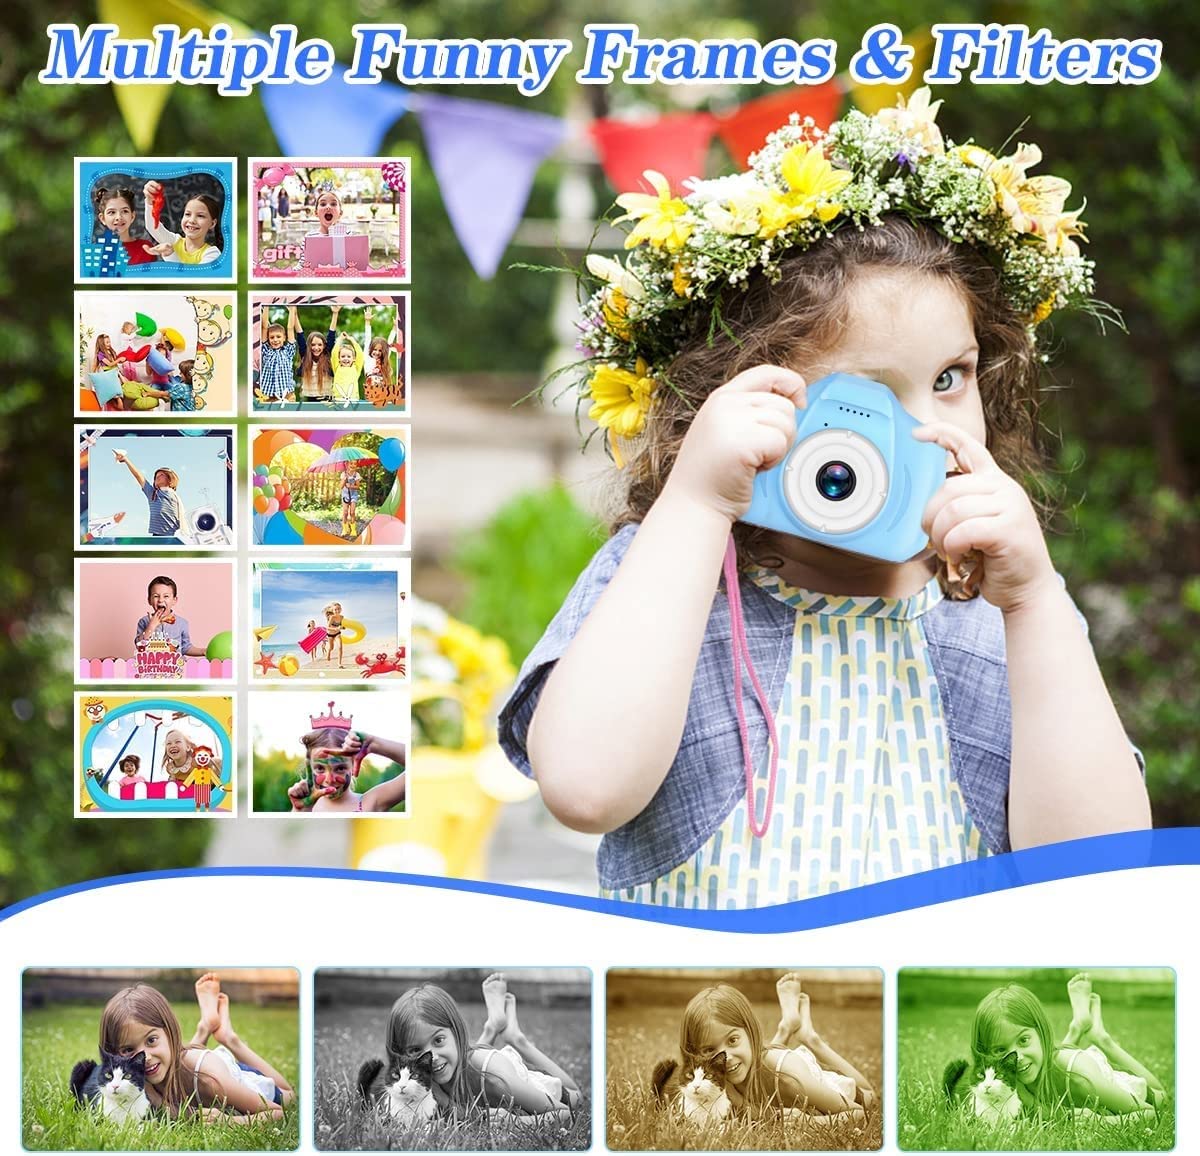 Digital Photo Camera - Multicolor Mini Video Recorder Camera - Portable Action Toy Camera for Kids - Perfect Birthday Gifting Item, Toys for Kids